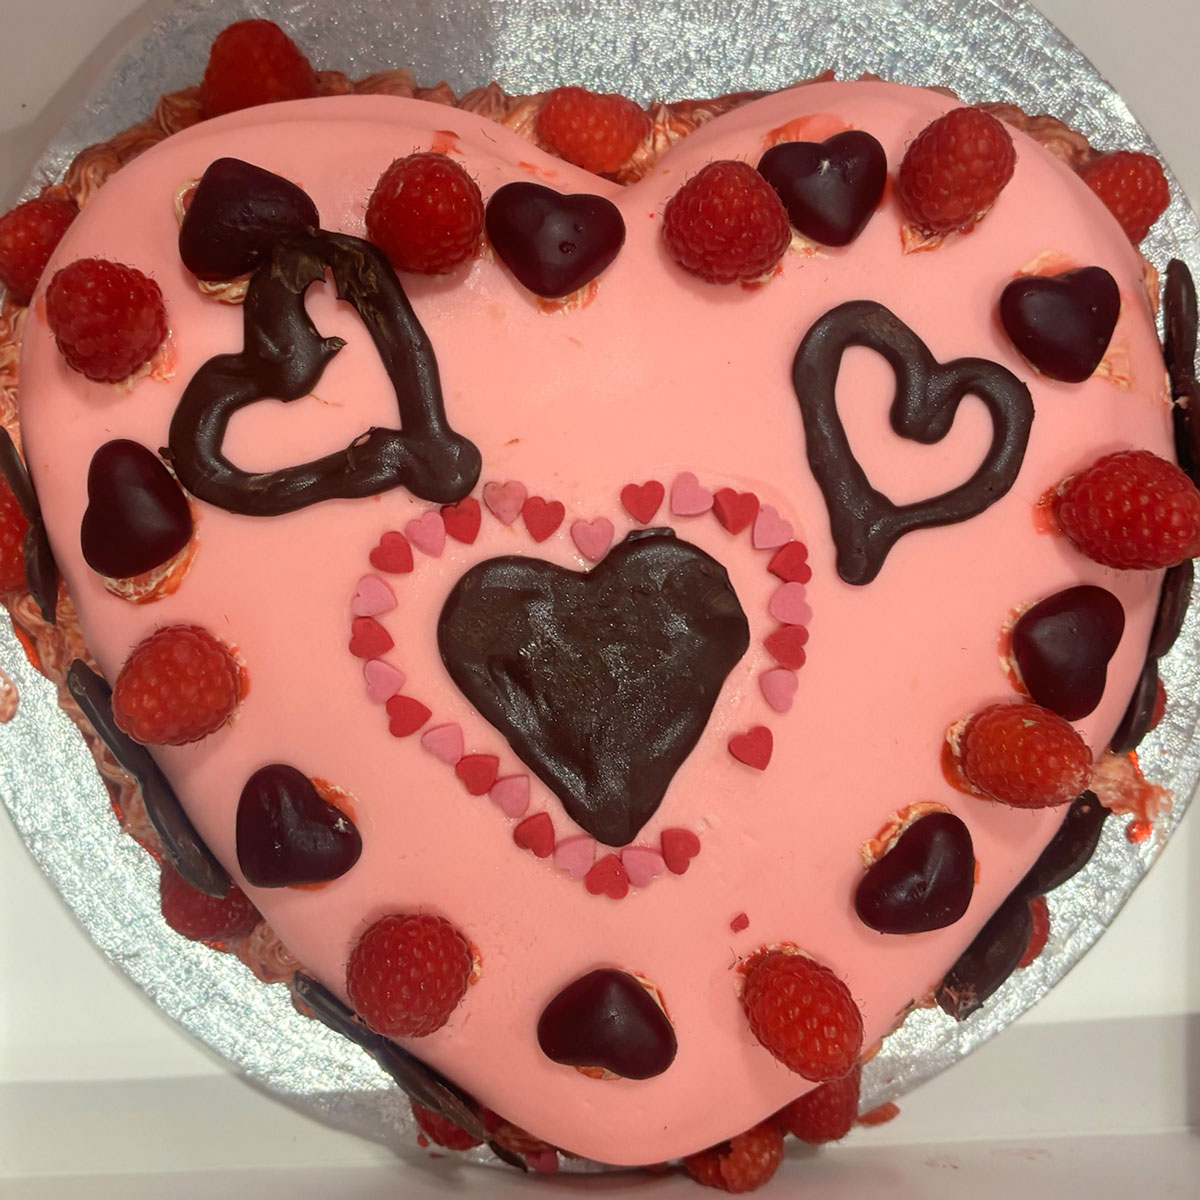 a pink and red cake in the shape of a heart with chocolate hearts and strawberries around the edge for the ebs cake competition